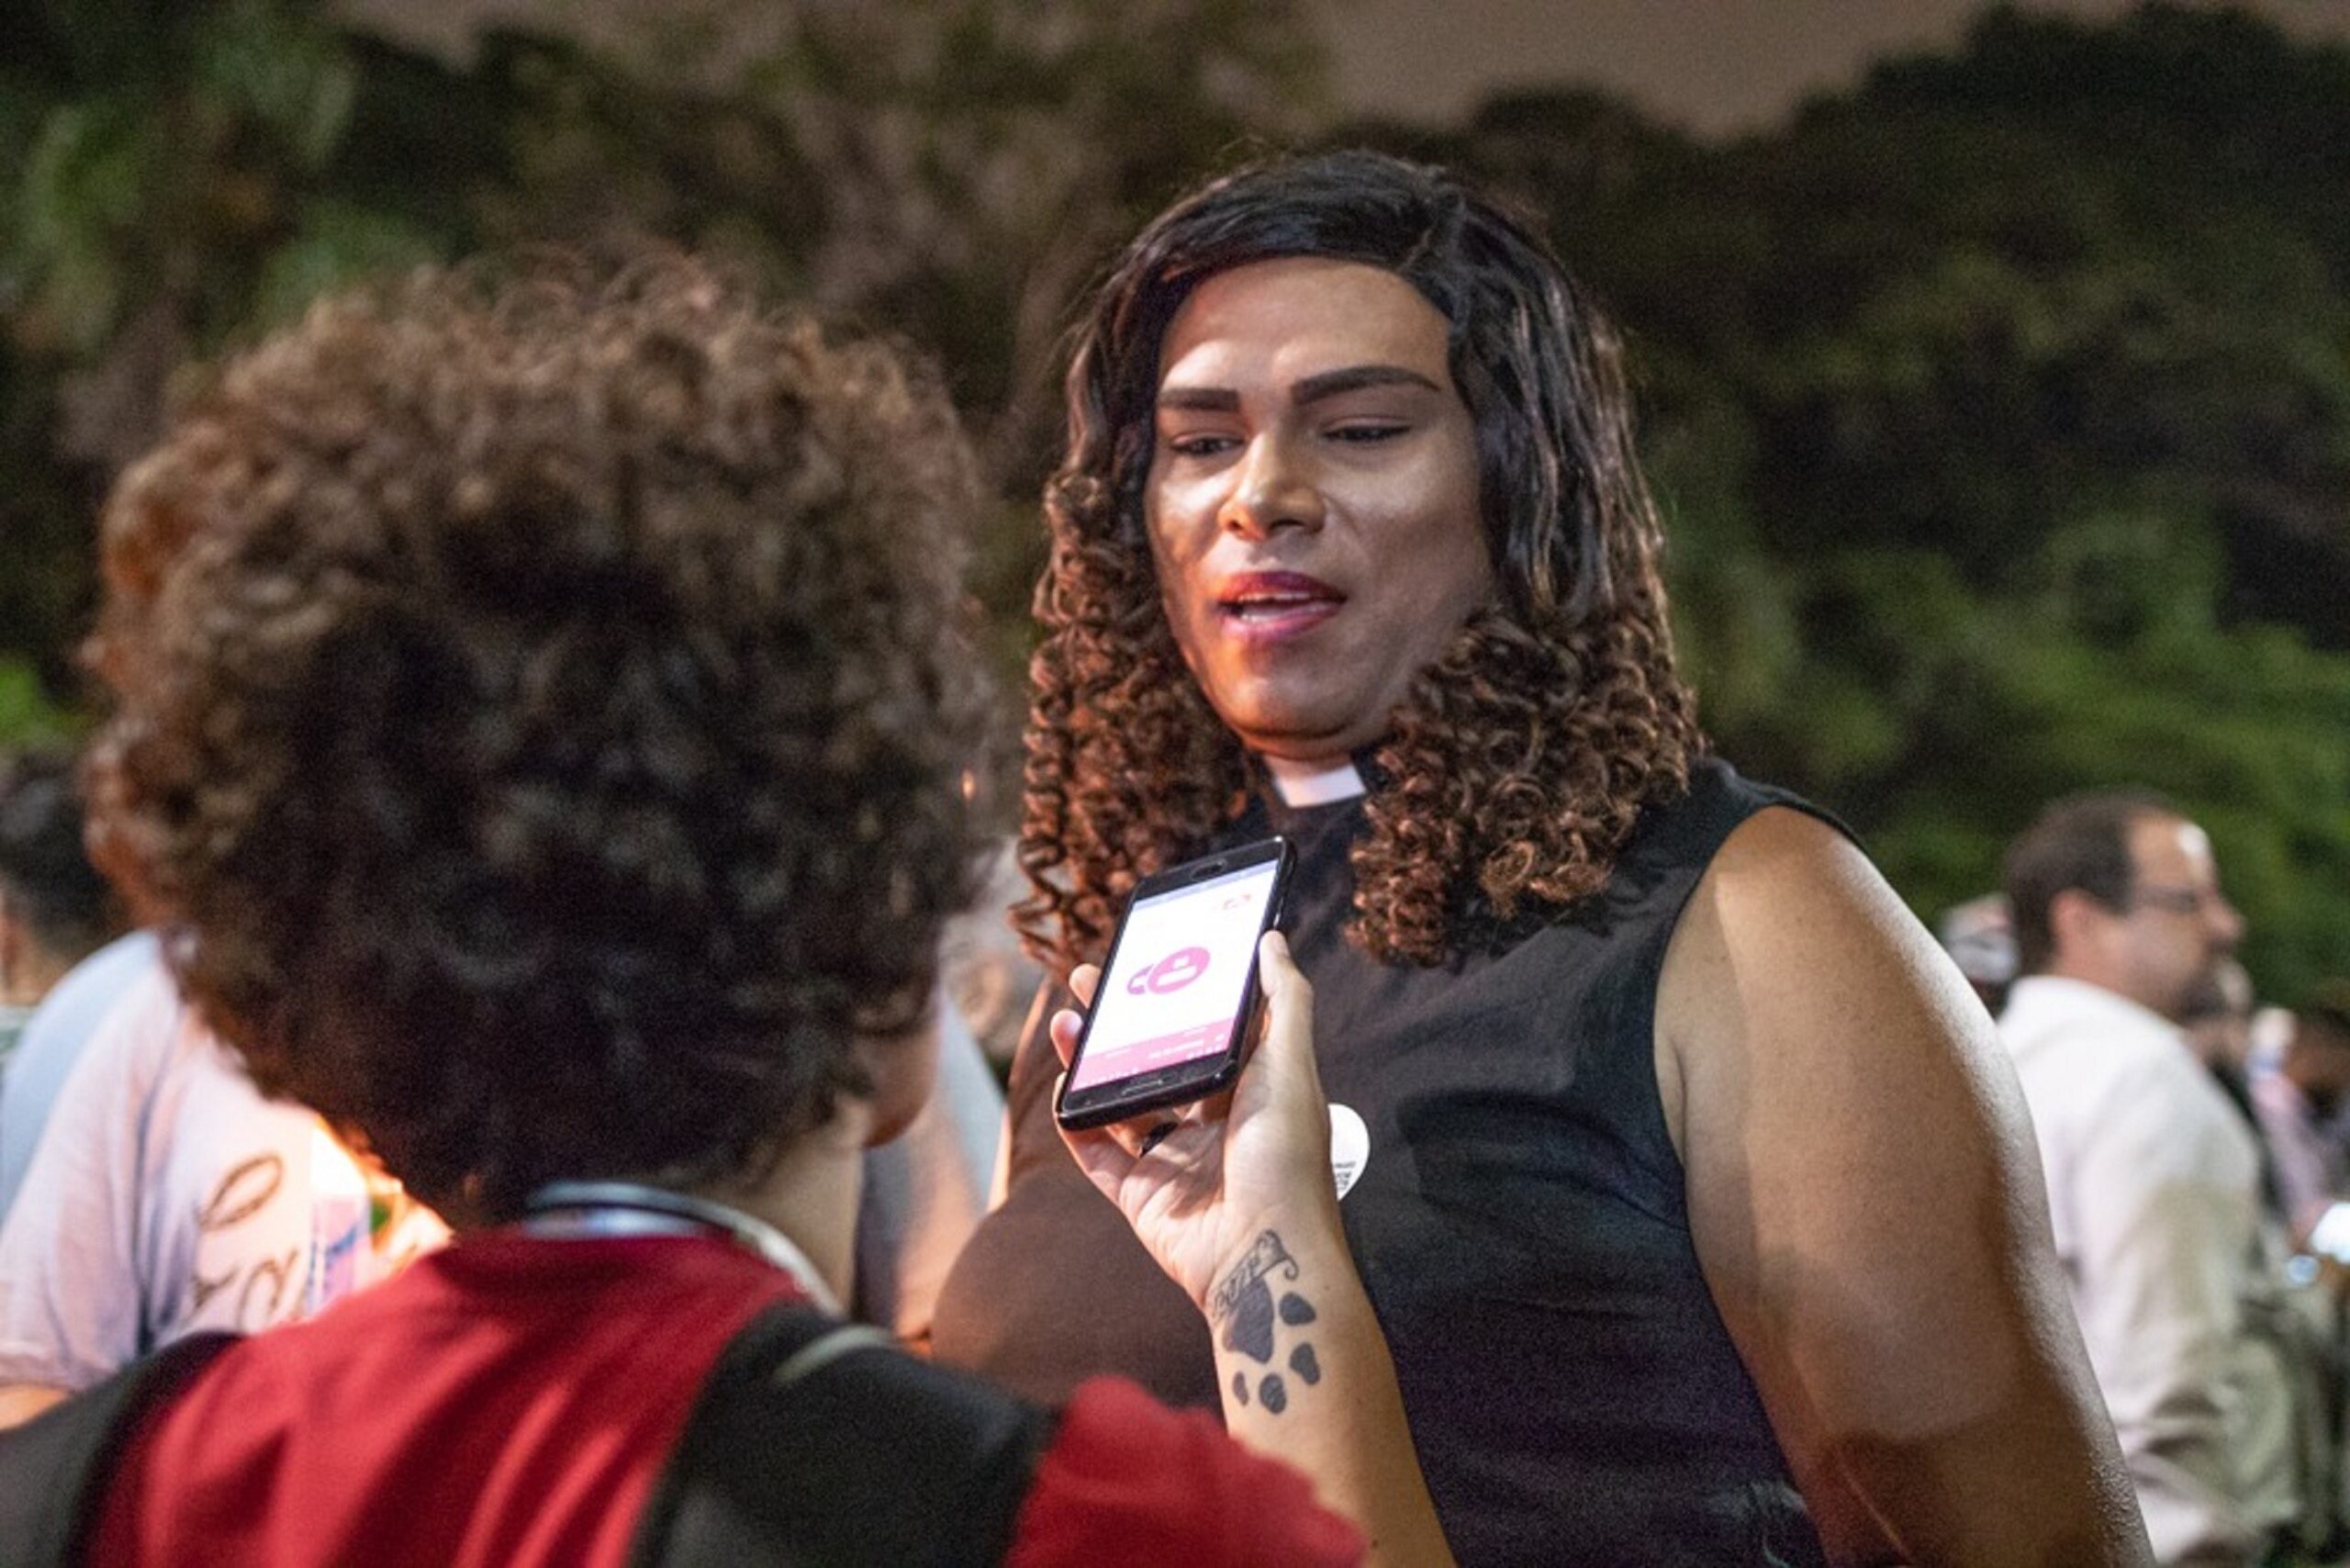 Trans woman speaks to a reporter holding a cell phone to interview her.